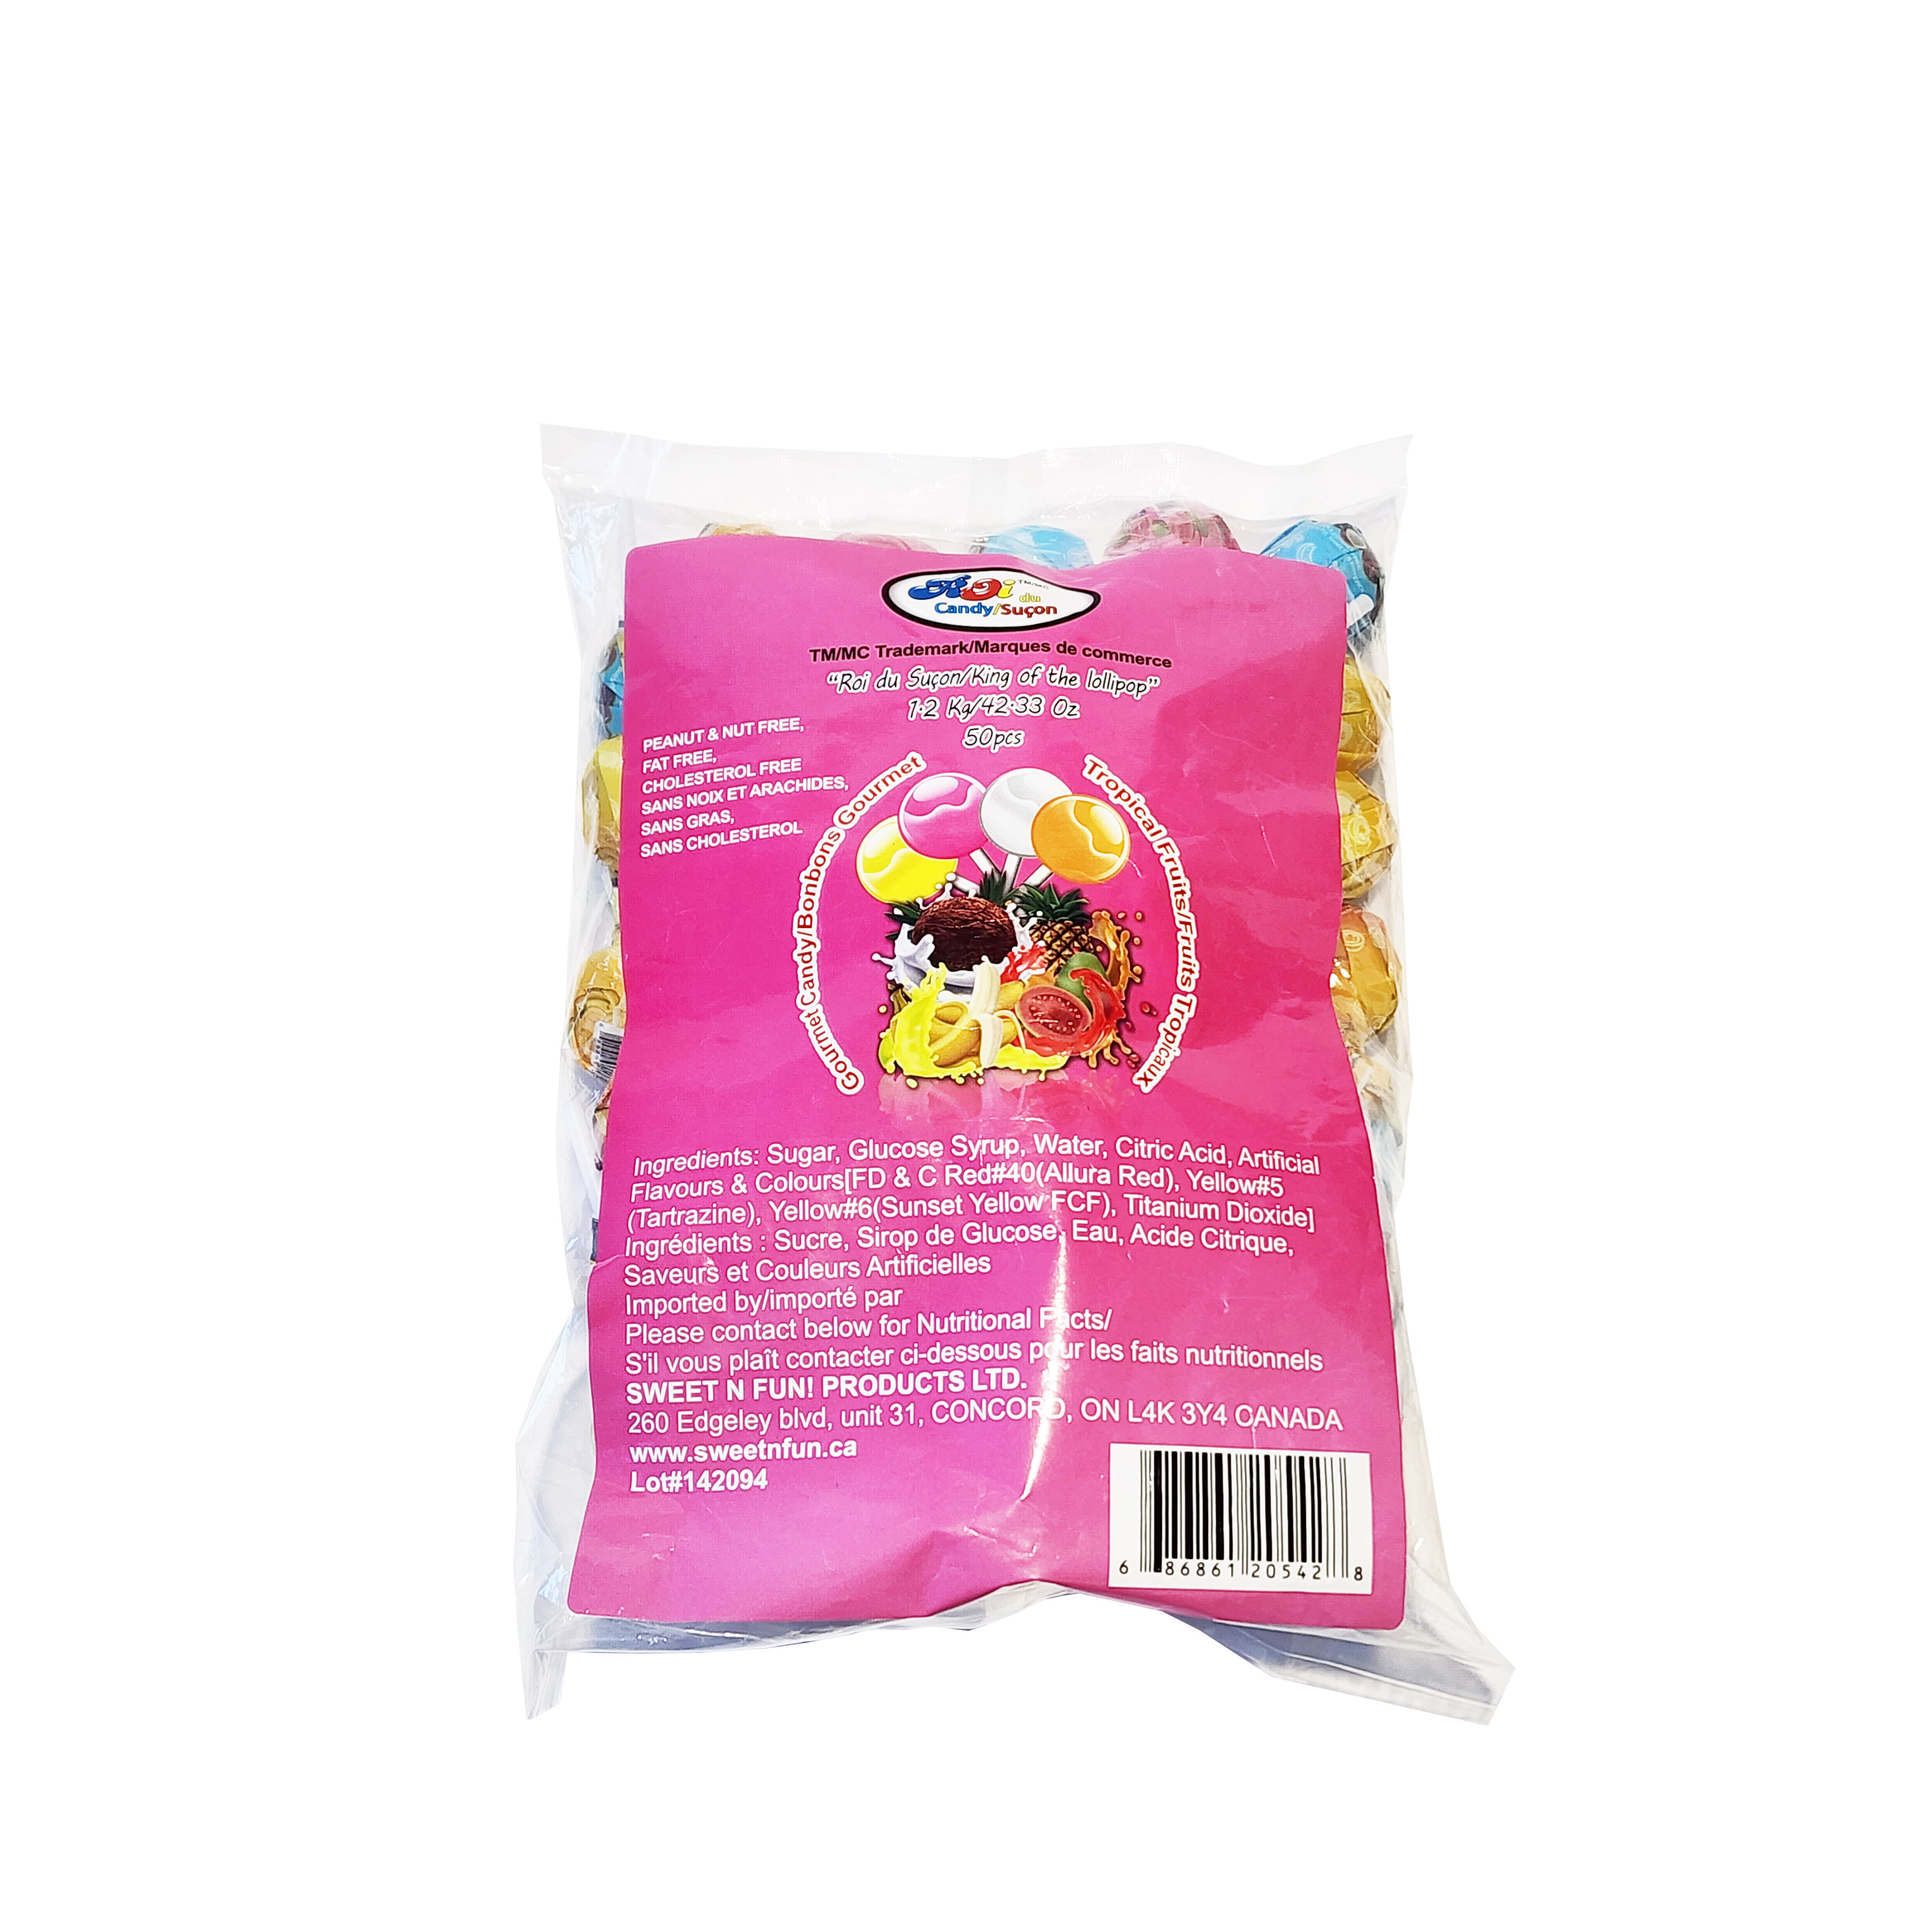 mini lollipop candies with four flavors of Guava, Coconut, Banana, and Pineapple in a bag. 50 pieces per bag